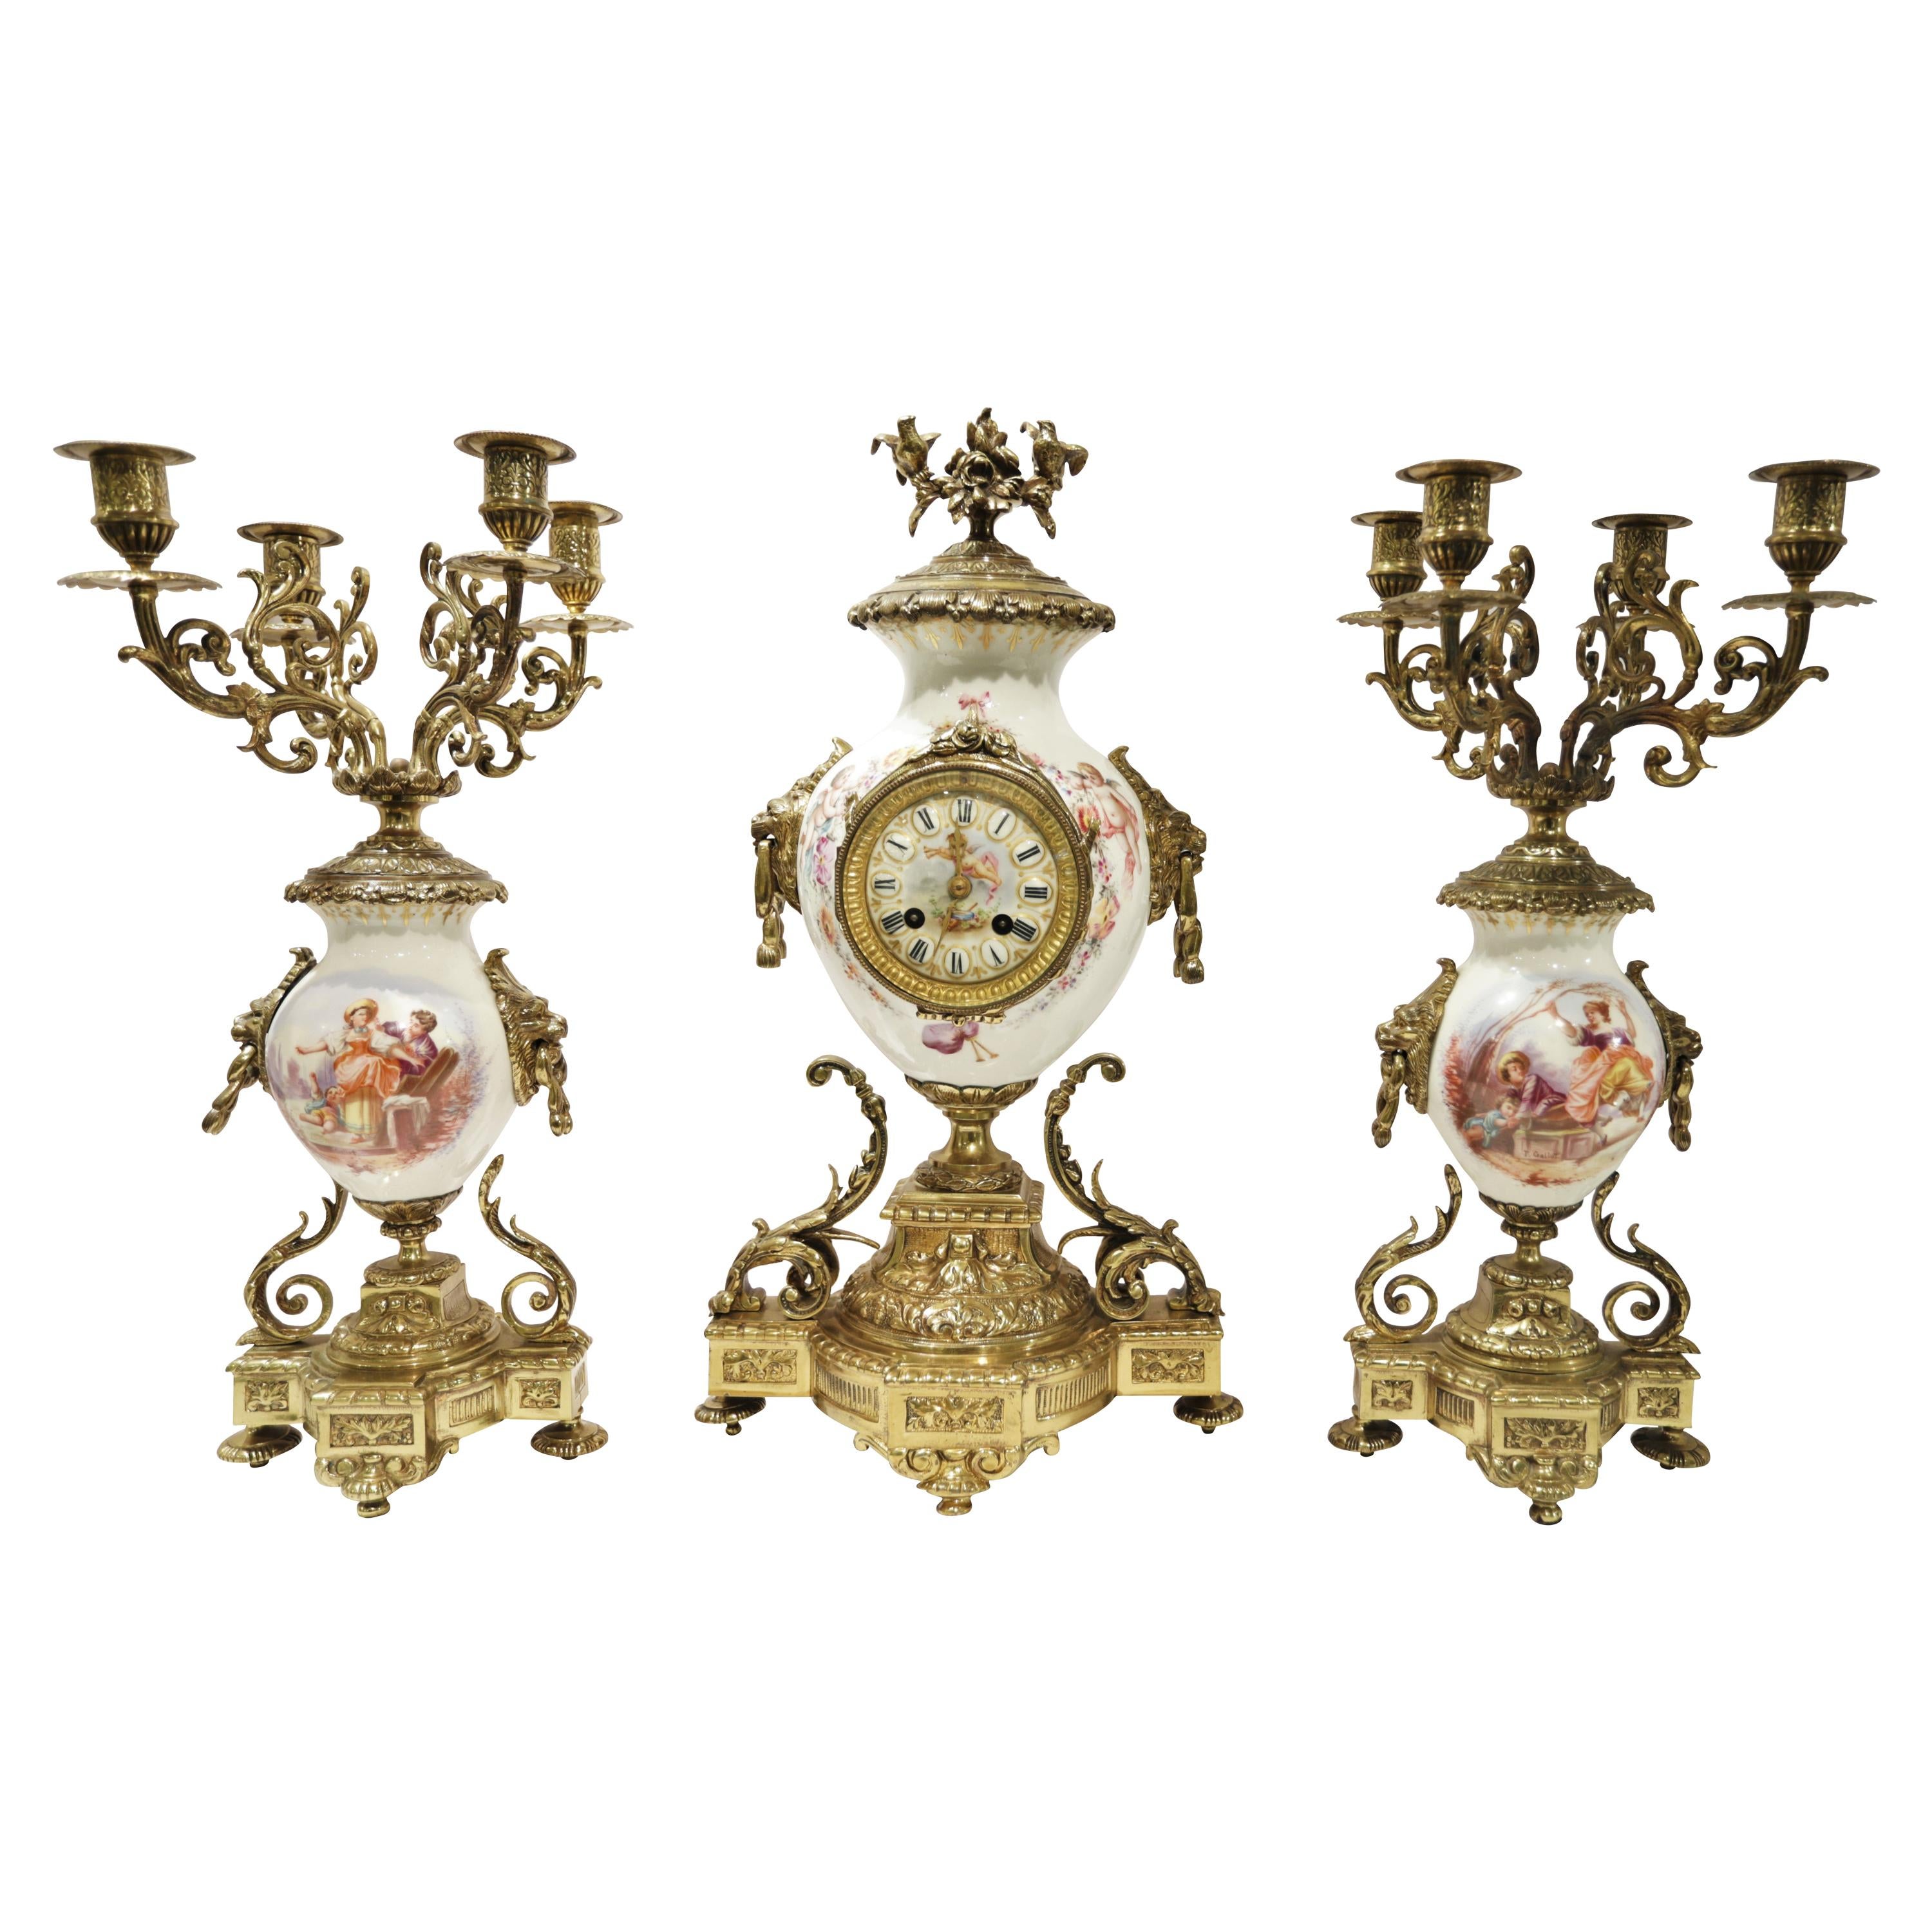 Three-Piece French Sevres Bronze Mounted Clock Set